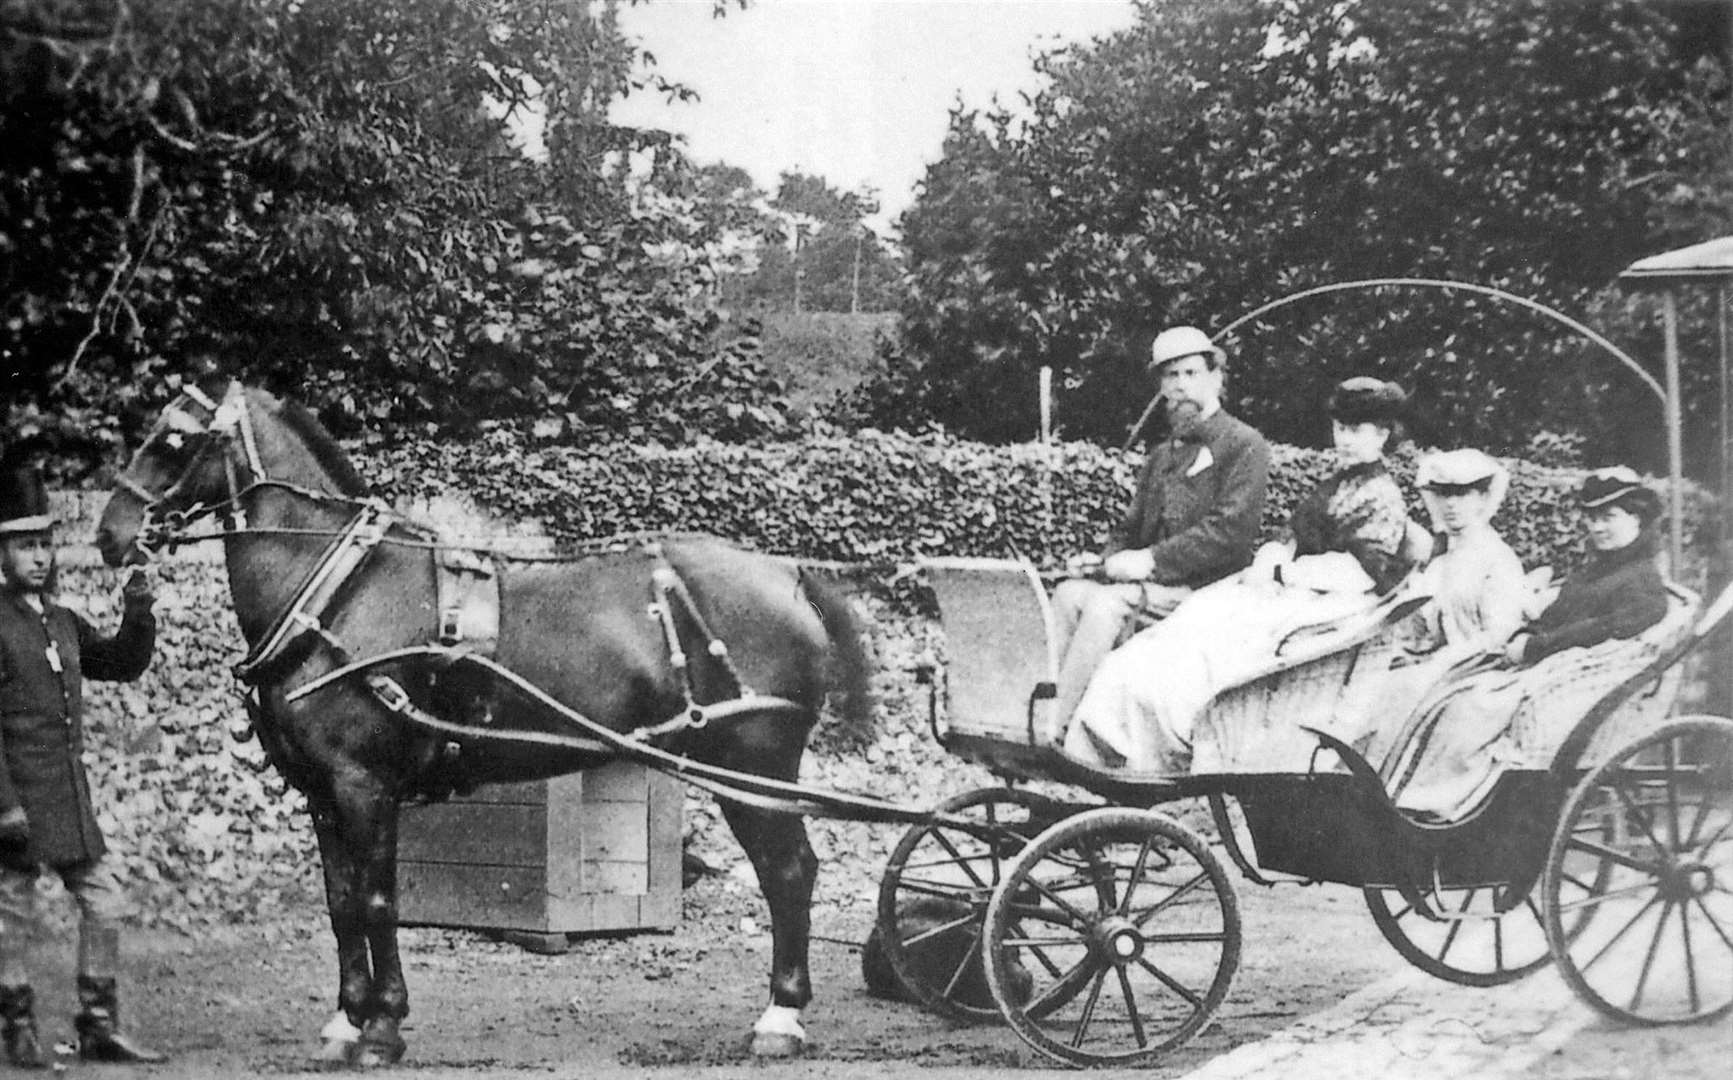 Charles Dickens and his family in a carriage at their home in Higham. At the horse’s head is groom John Marsh, who foiled an attempt to cause "serious mischief" to the vehicle